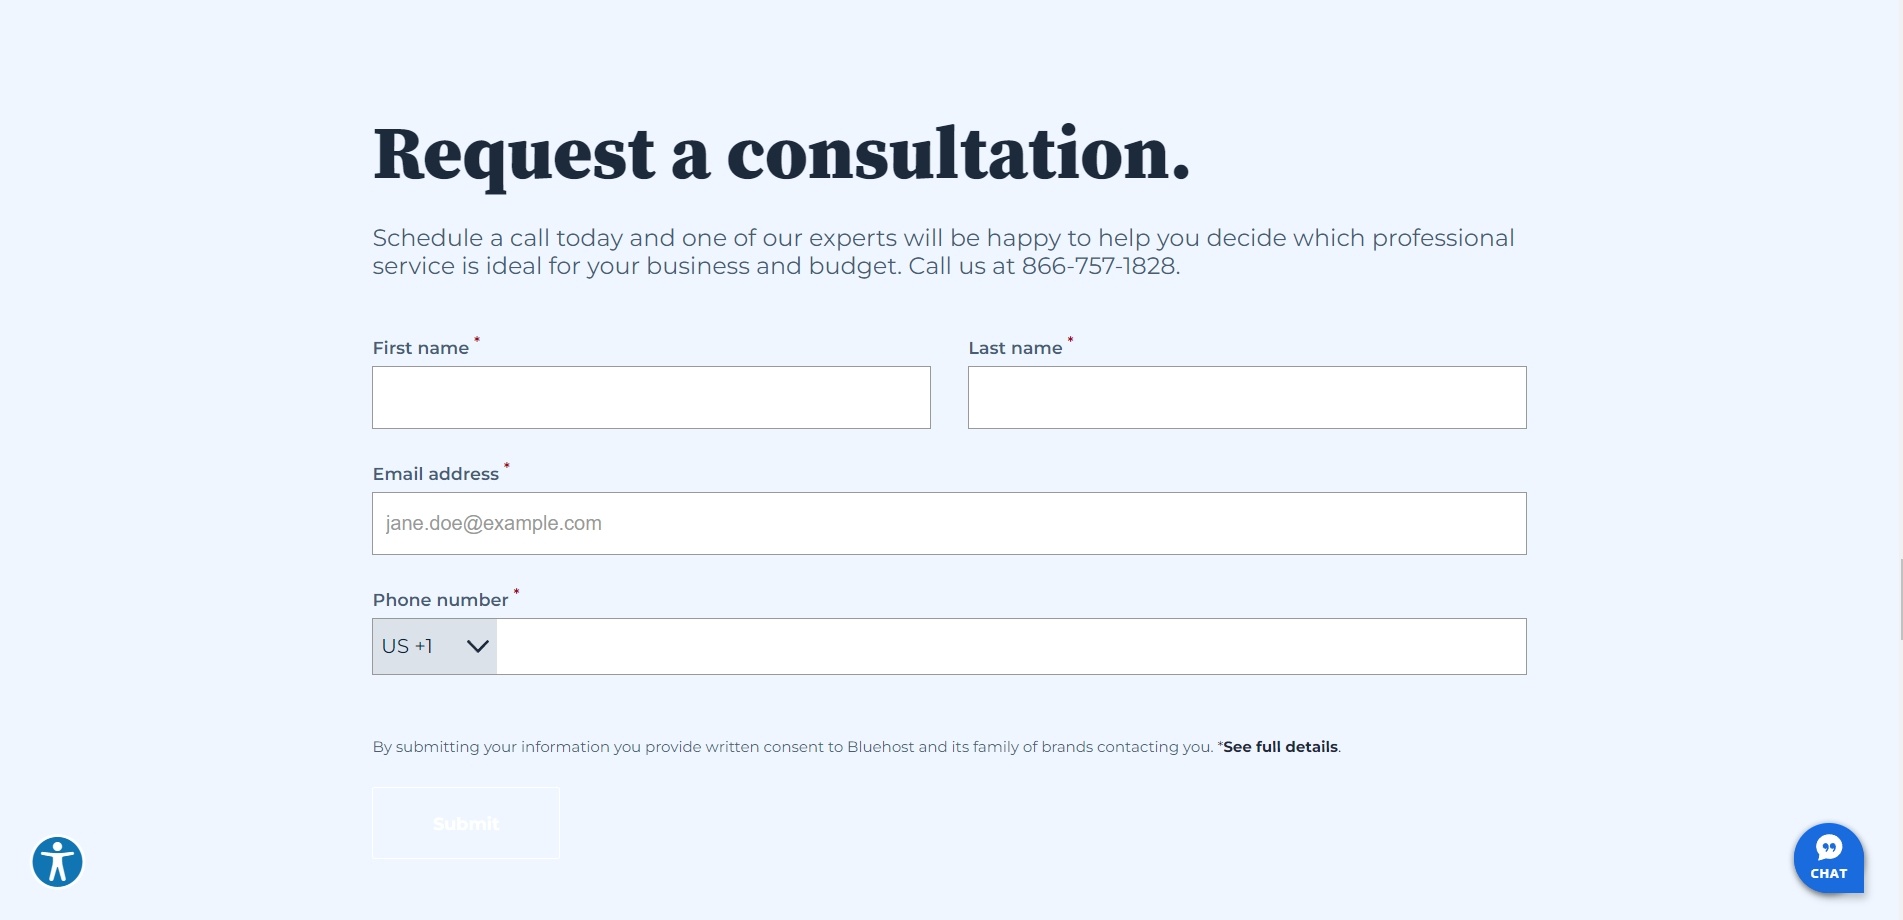 Bluehost’s email sign up form, an example offering a consultation